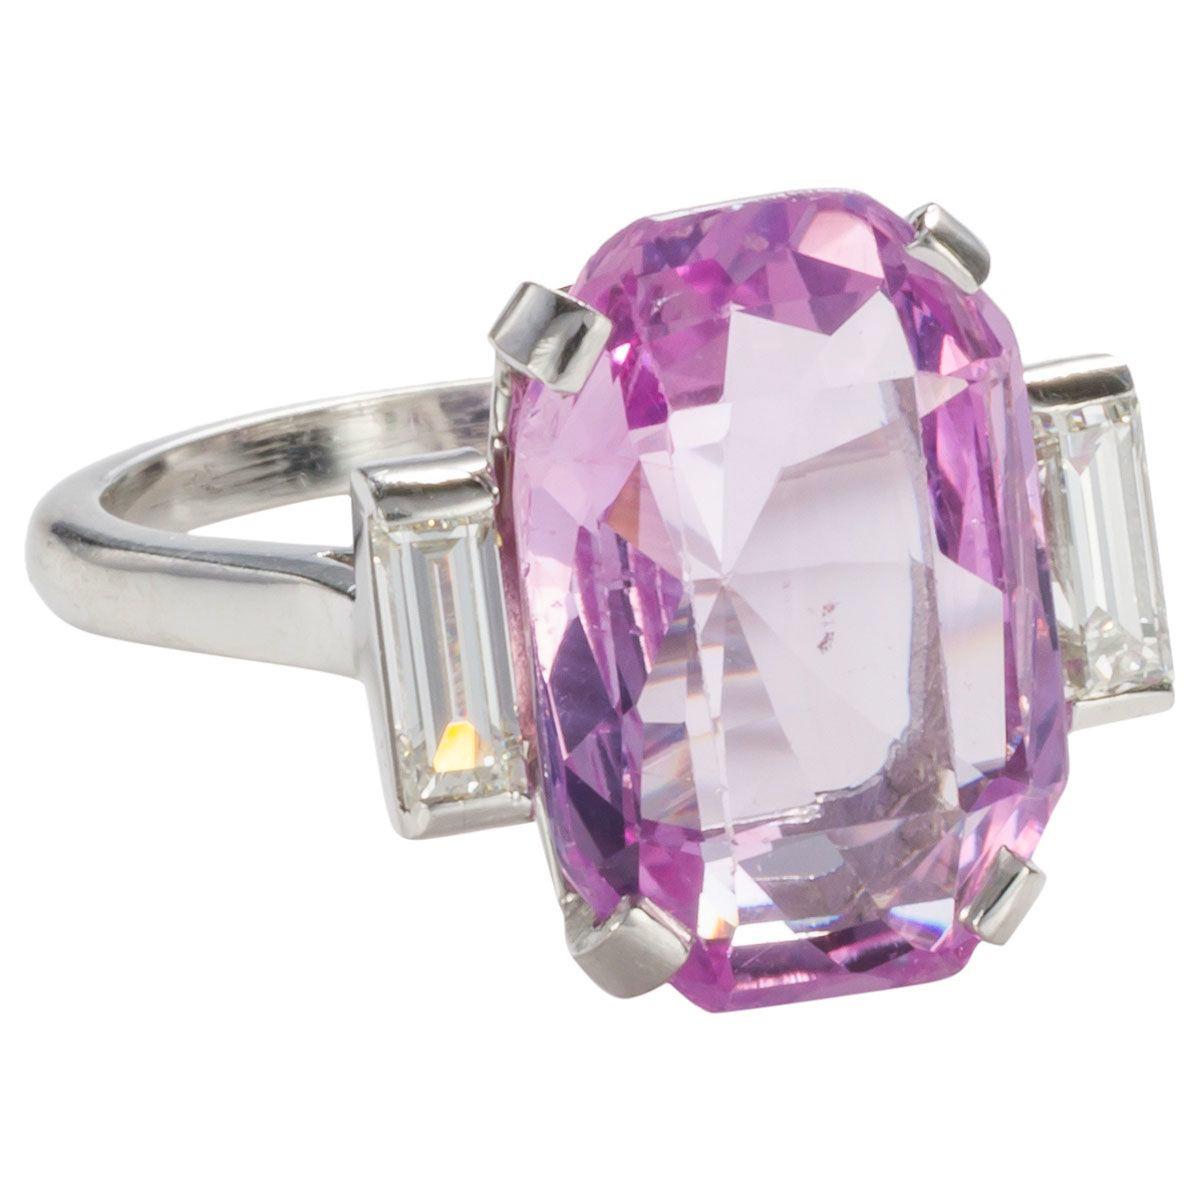 Pretty in pink - this is truly a pink lovers ring. Showcasing the most magnificent 8.27ct unheated SSEF (Swiss Gemmological Institute) Ceylonese pink sapphire cut in the most perfect proportions of a modified Octagonal Step cut. Simple and